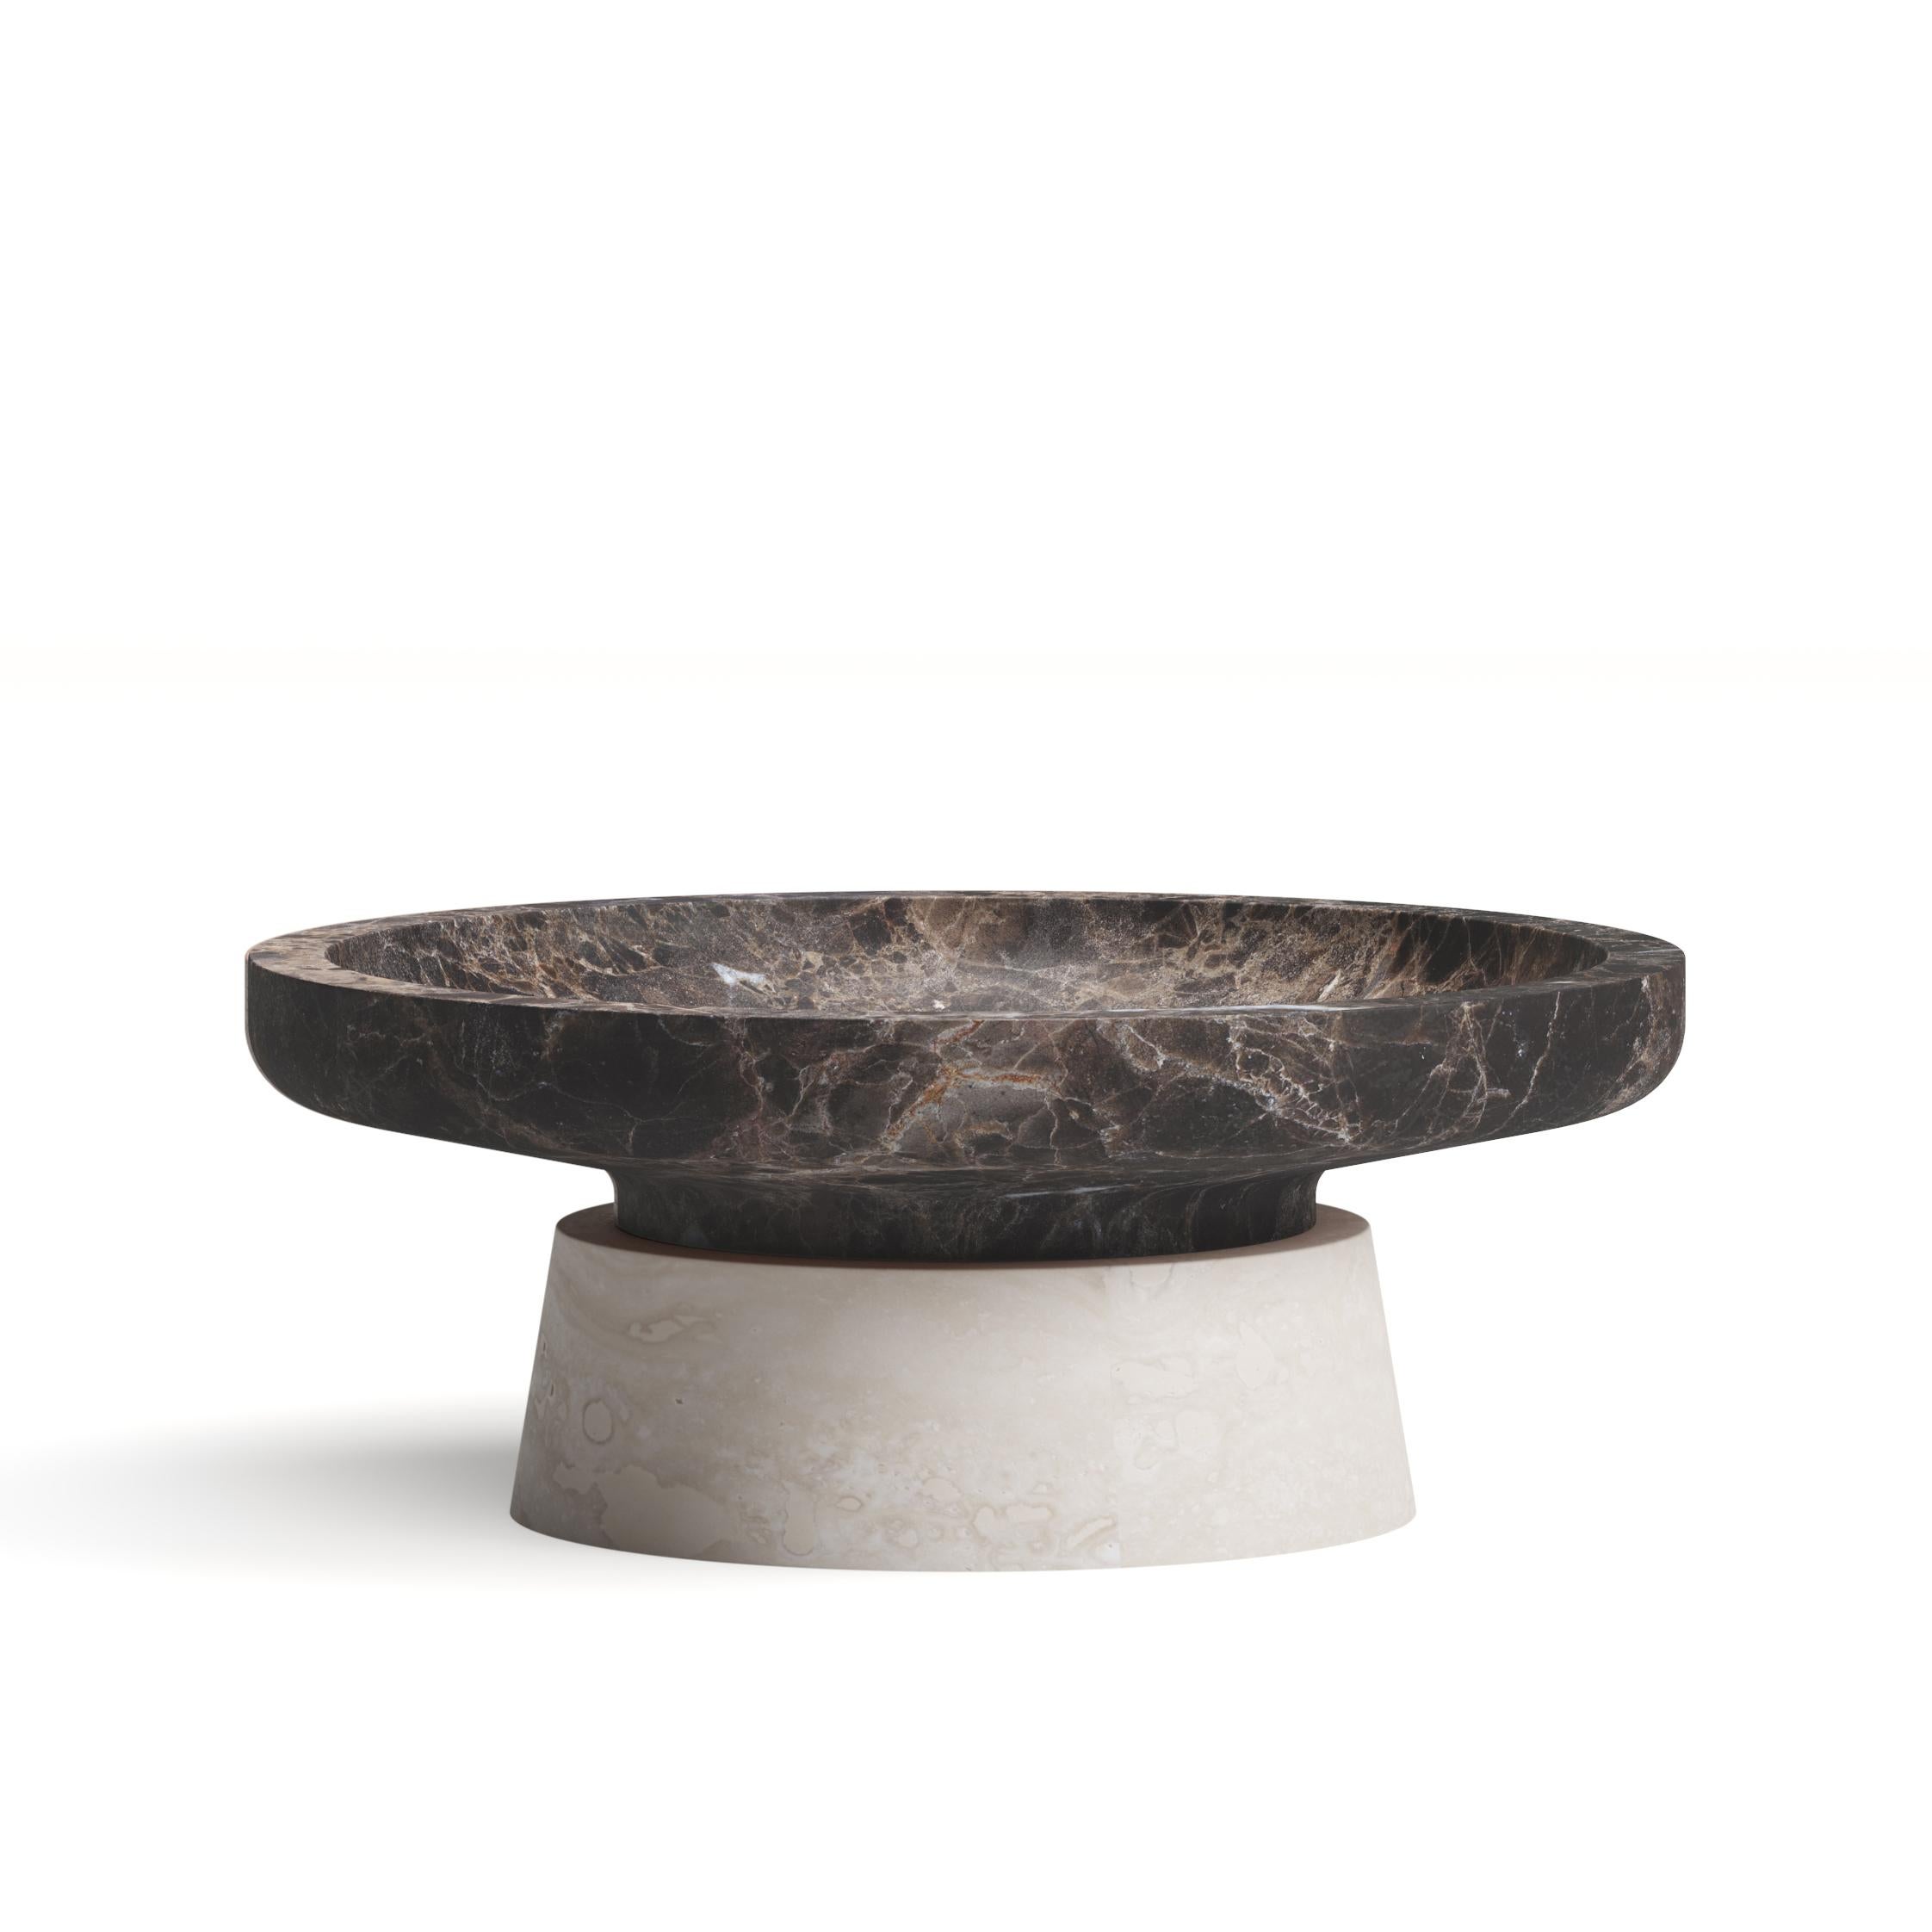 Trivoli Centrepiece by Ivan Colominas
Dimensions: 37 x 14.5 cm
Materials: Travertine Marble, Emperador Dark Marble. 

TIVOLI COLLECTION:
TIVOLI, a picturesque city situated on the western slopes of the Sabine Hills, was the place that the Ancient